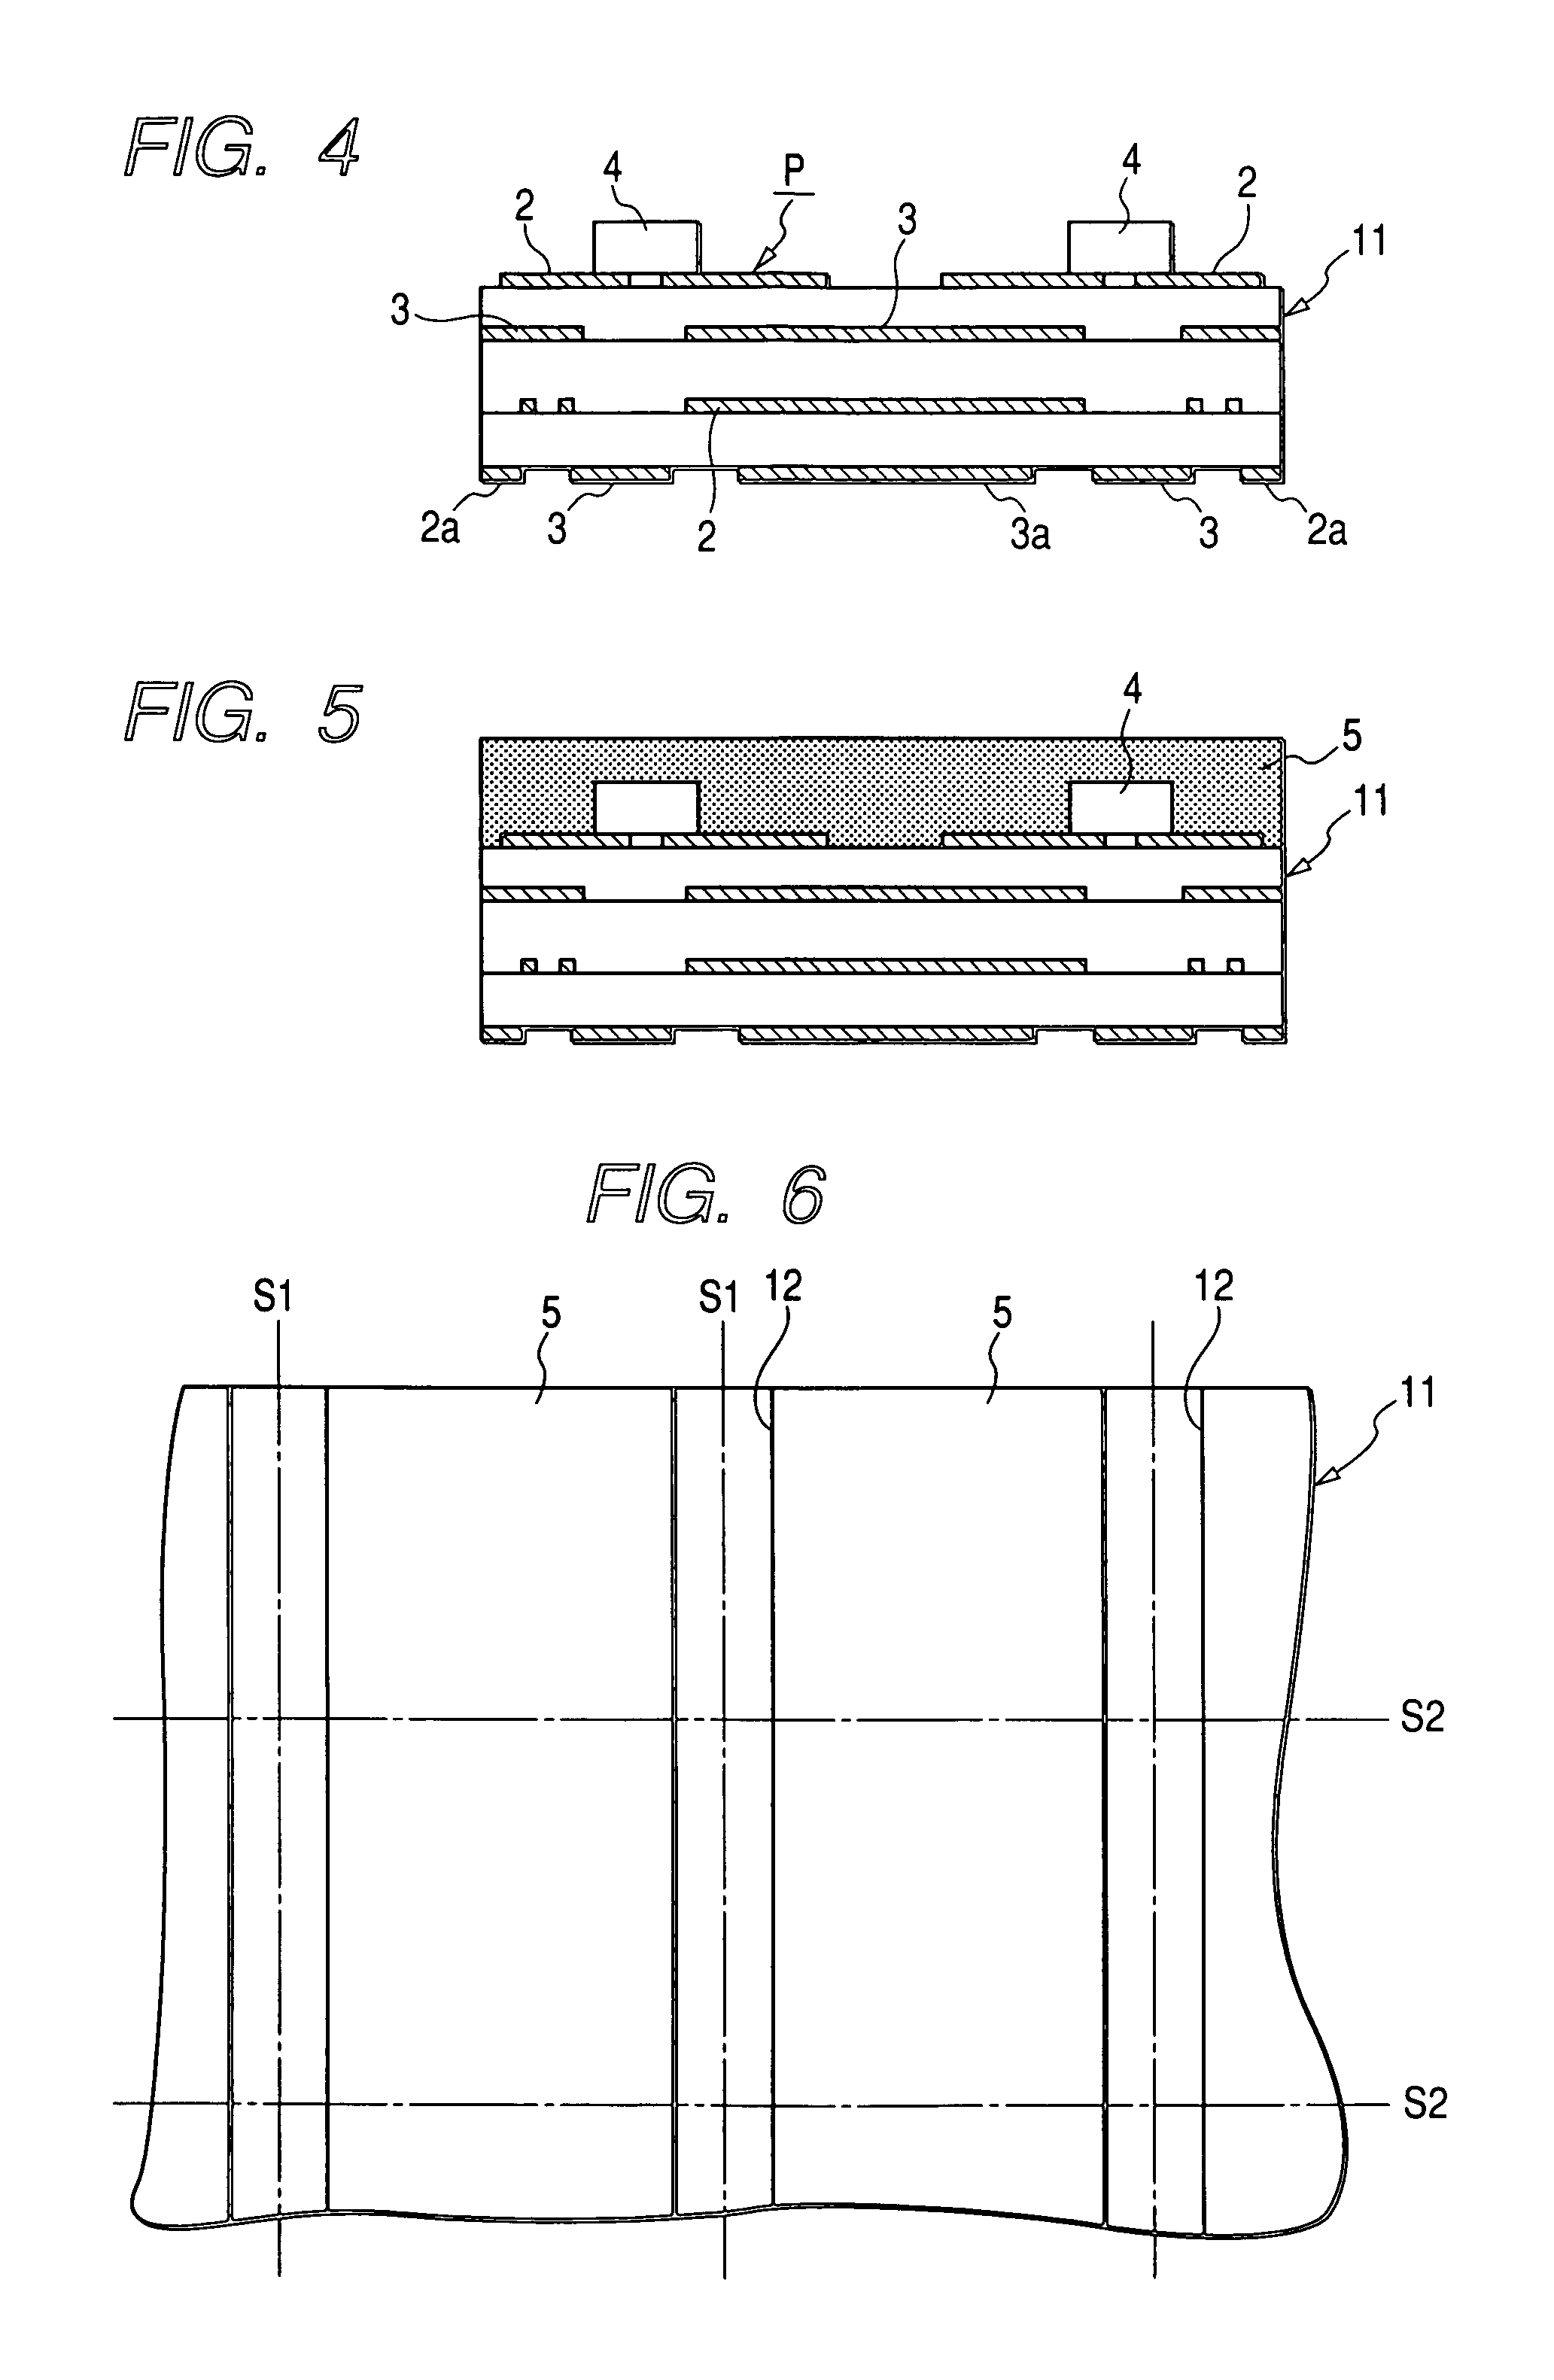 Method of manufacturing shielded electronic circuit units